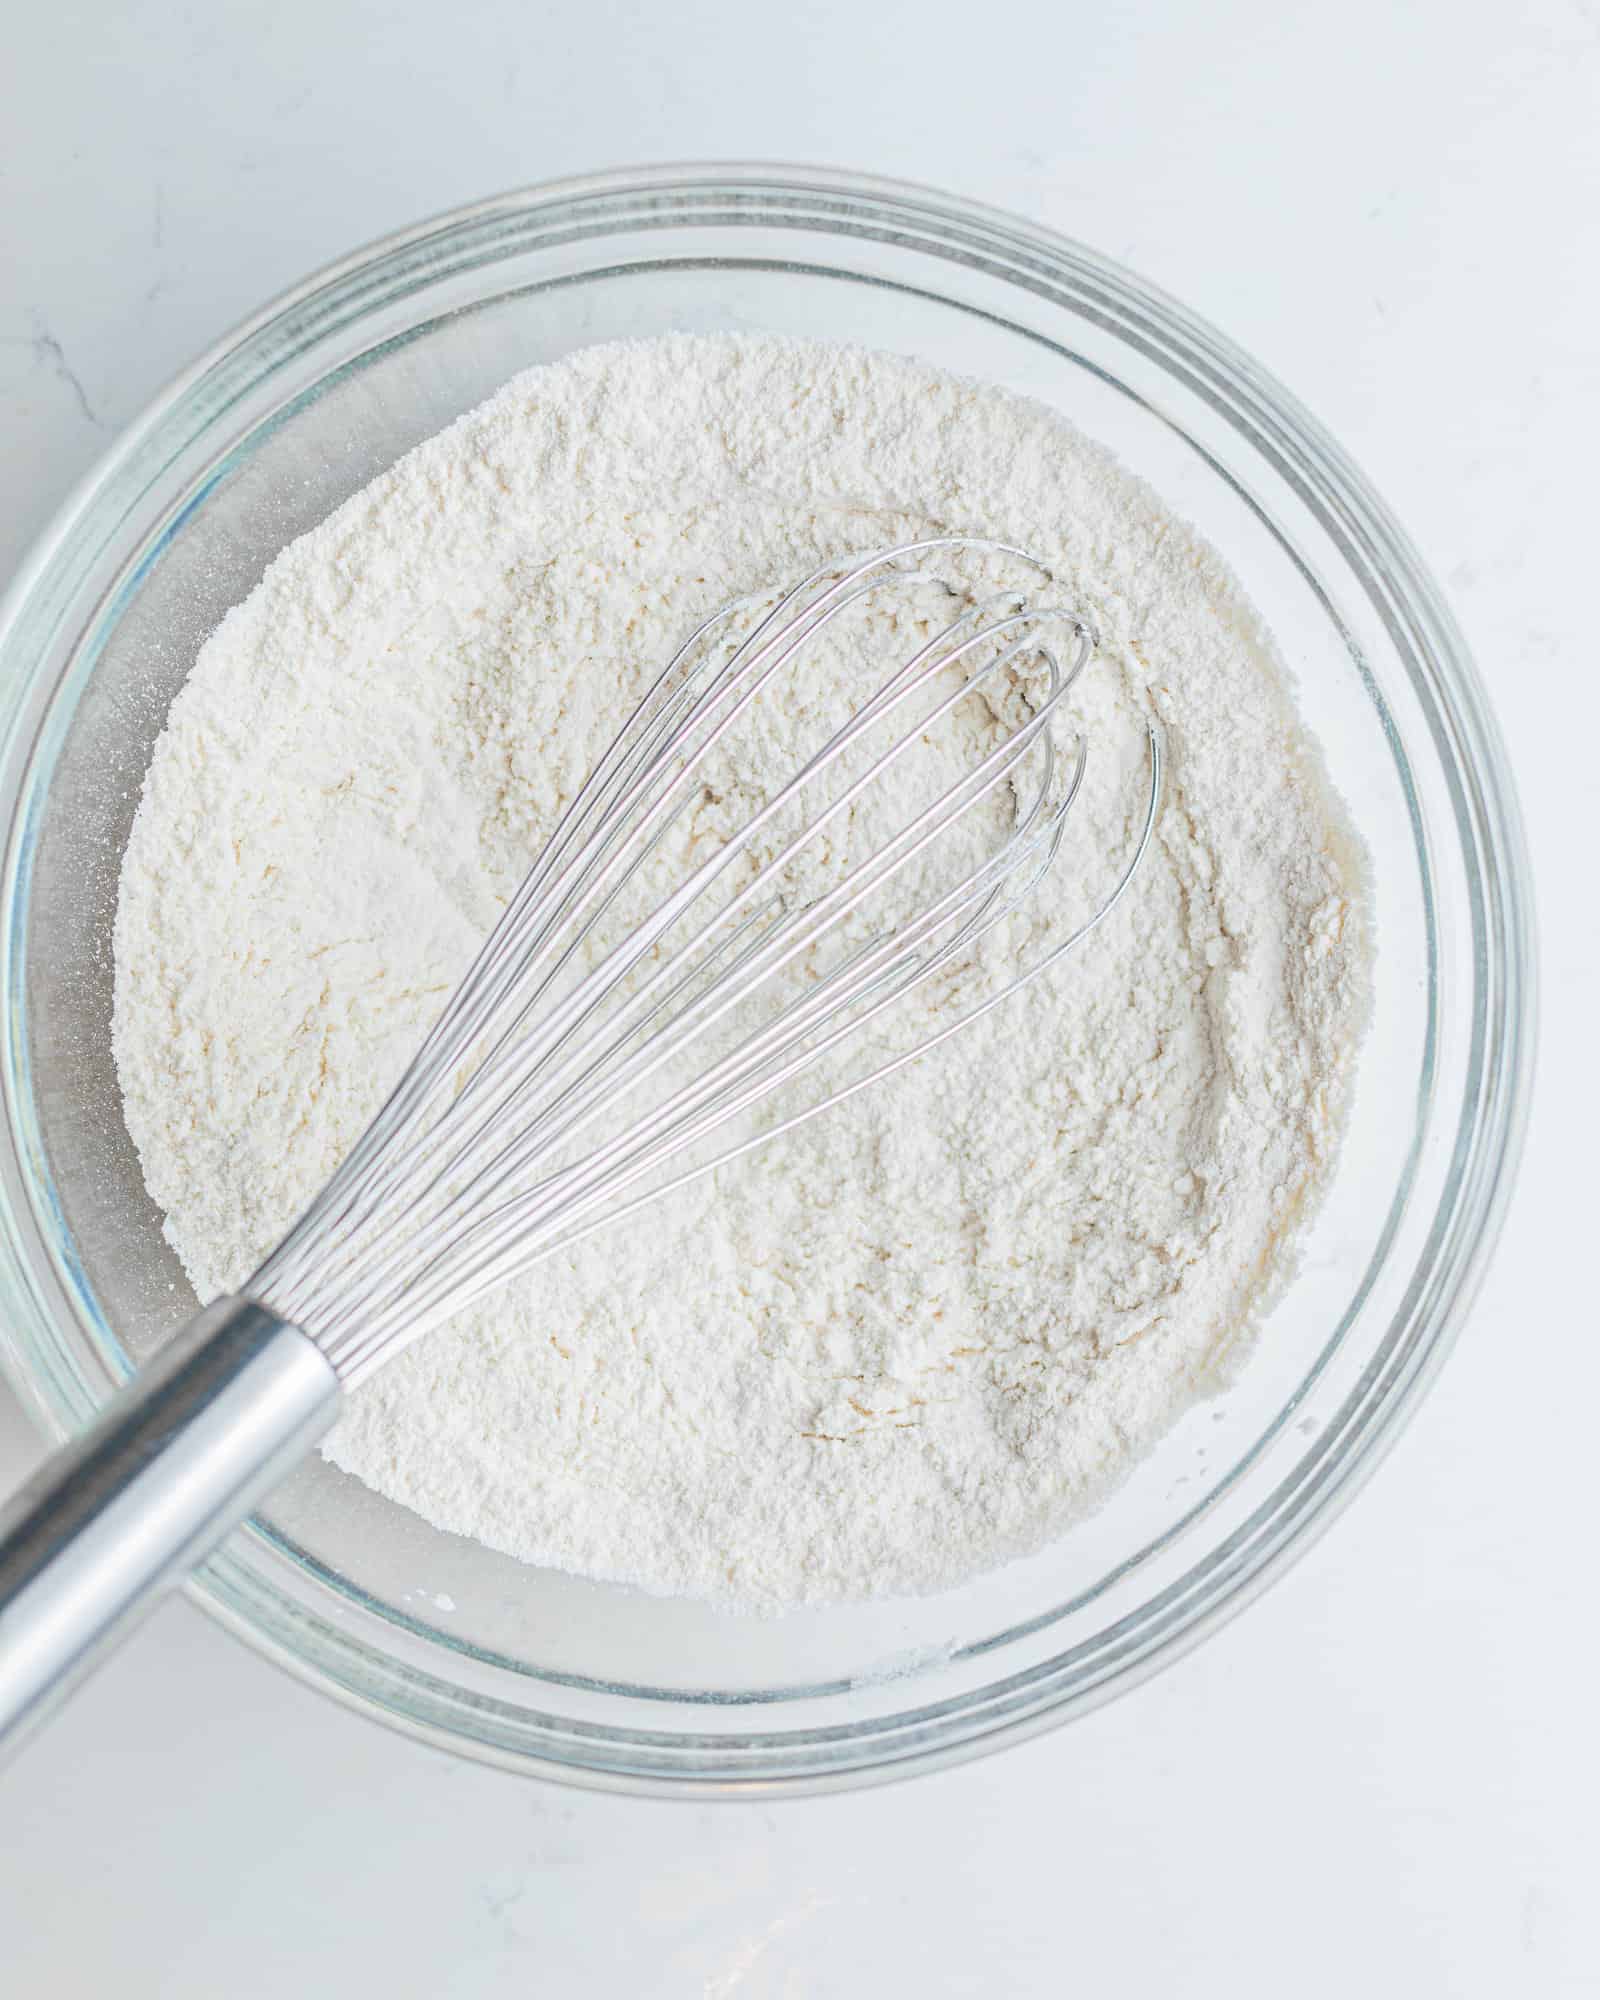 flour, baking powder, baking soda, and salt mixed together in a mixing bowl to form the dry ingredients for this cupcake recipe